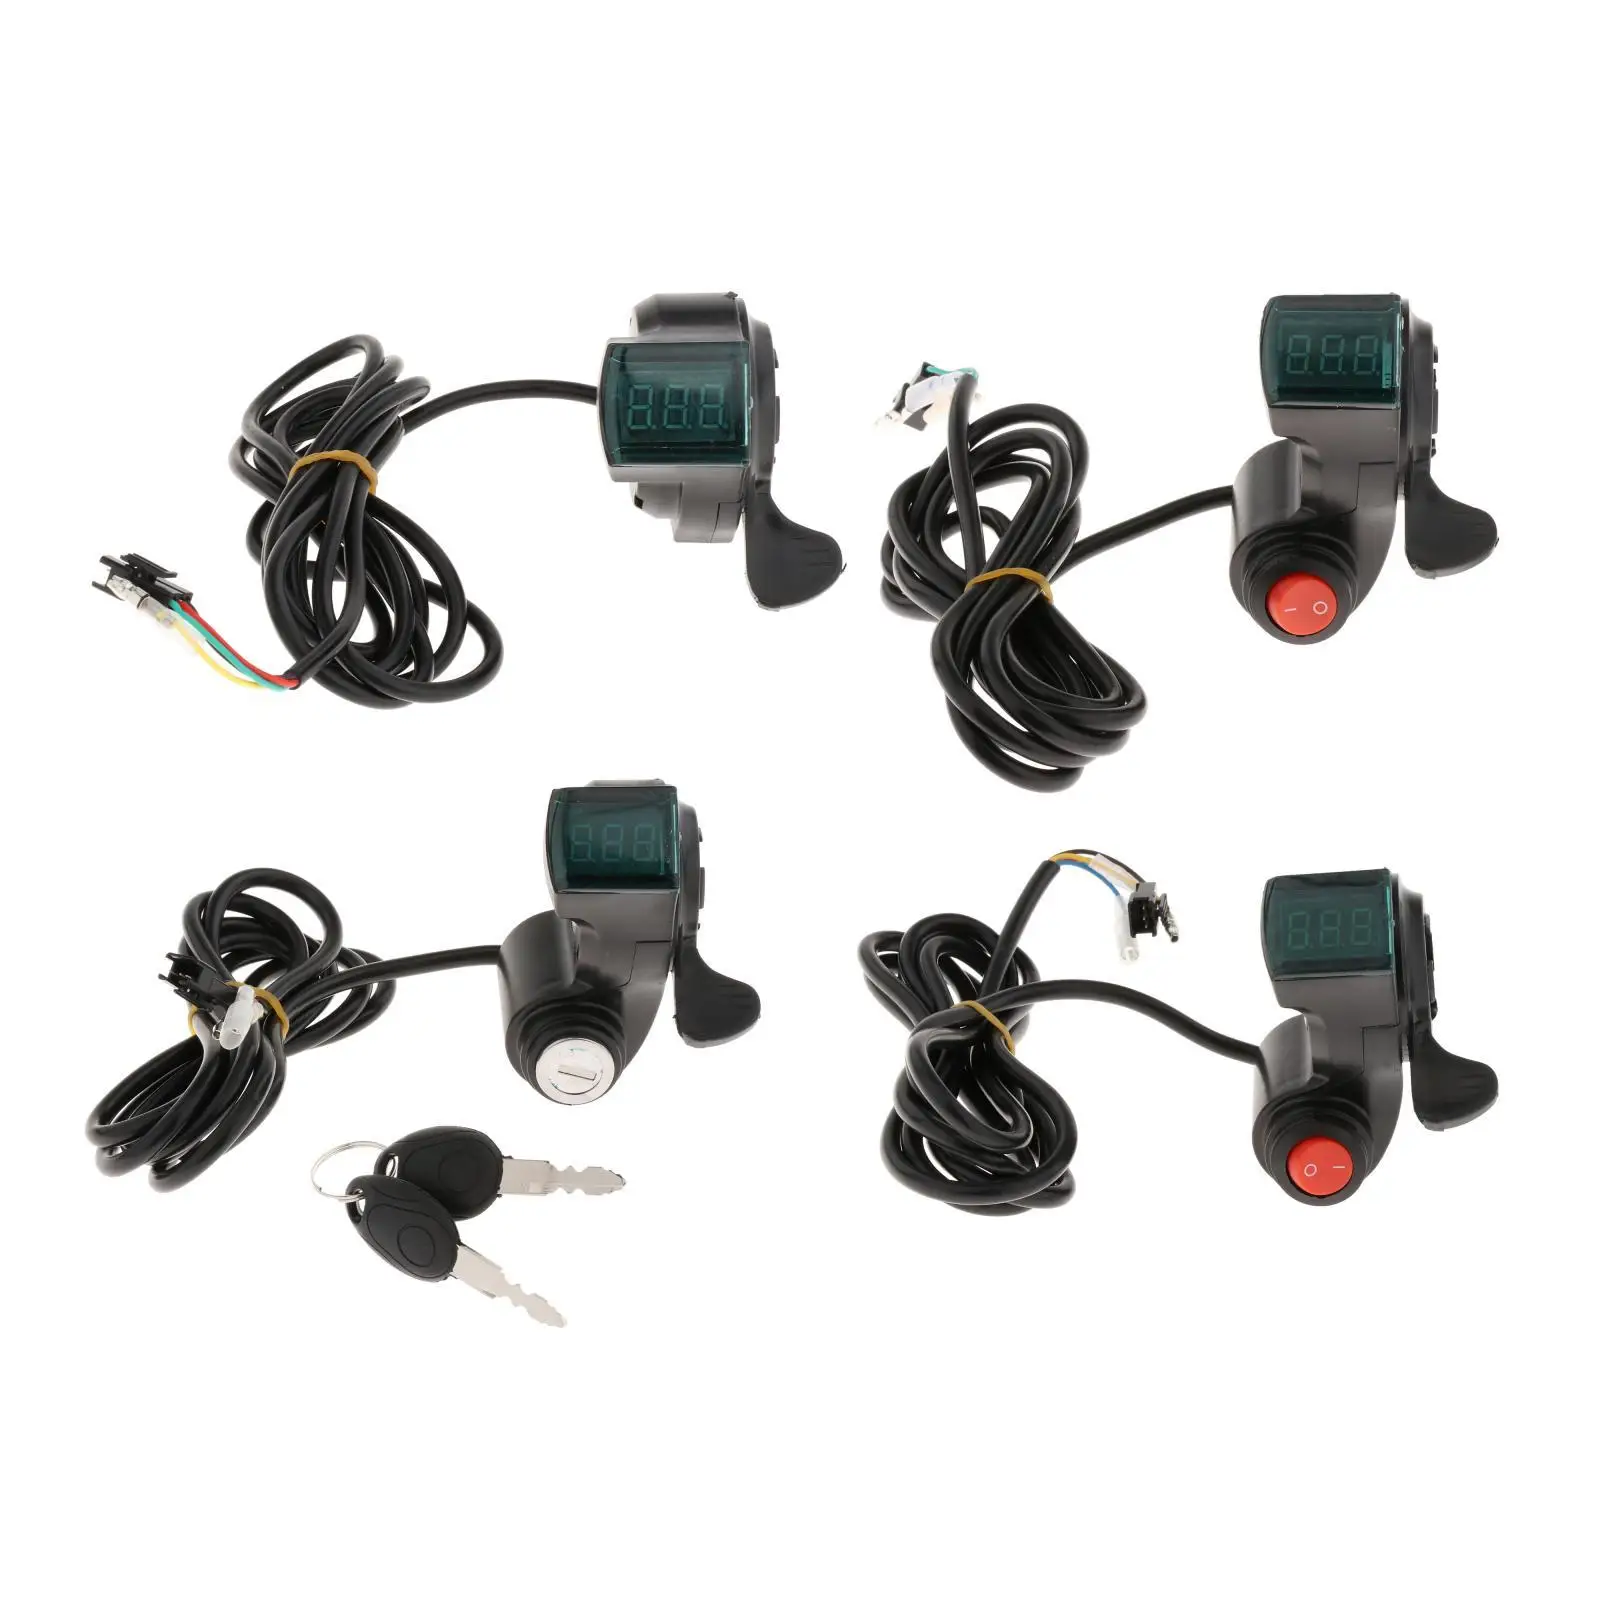  Bike Voltage Display   Scooter Electric Vehicle  Throttle Accessories